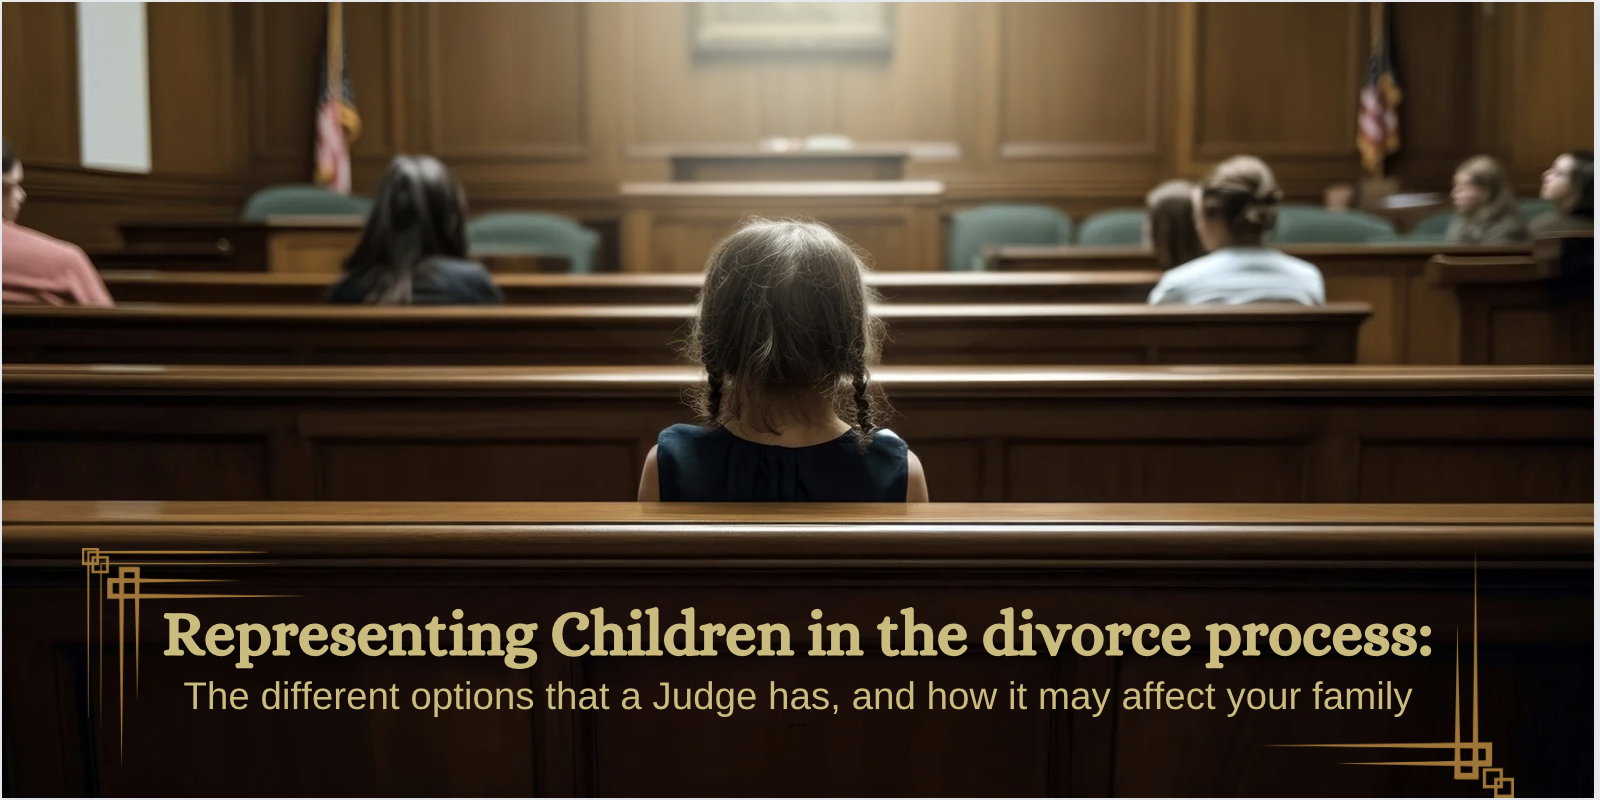 Child sits alone in a court room. Title "Representing Children in the divorce process: The different options that a judge has, and how it may affect your family"